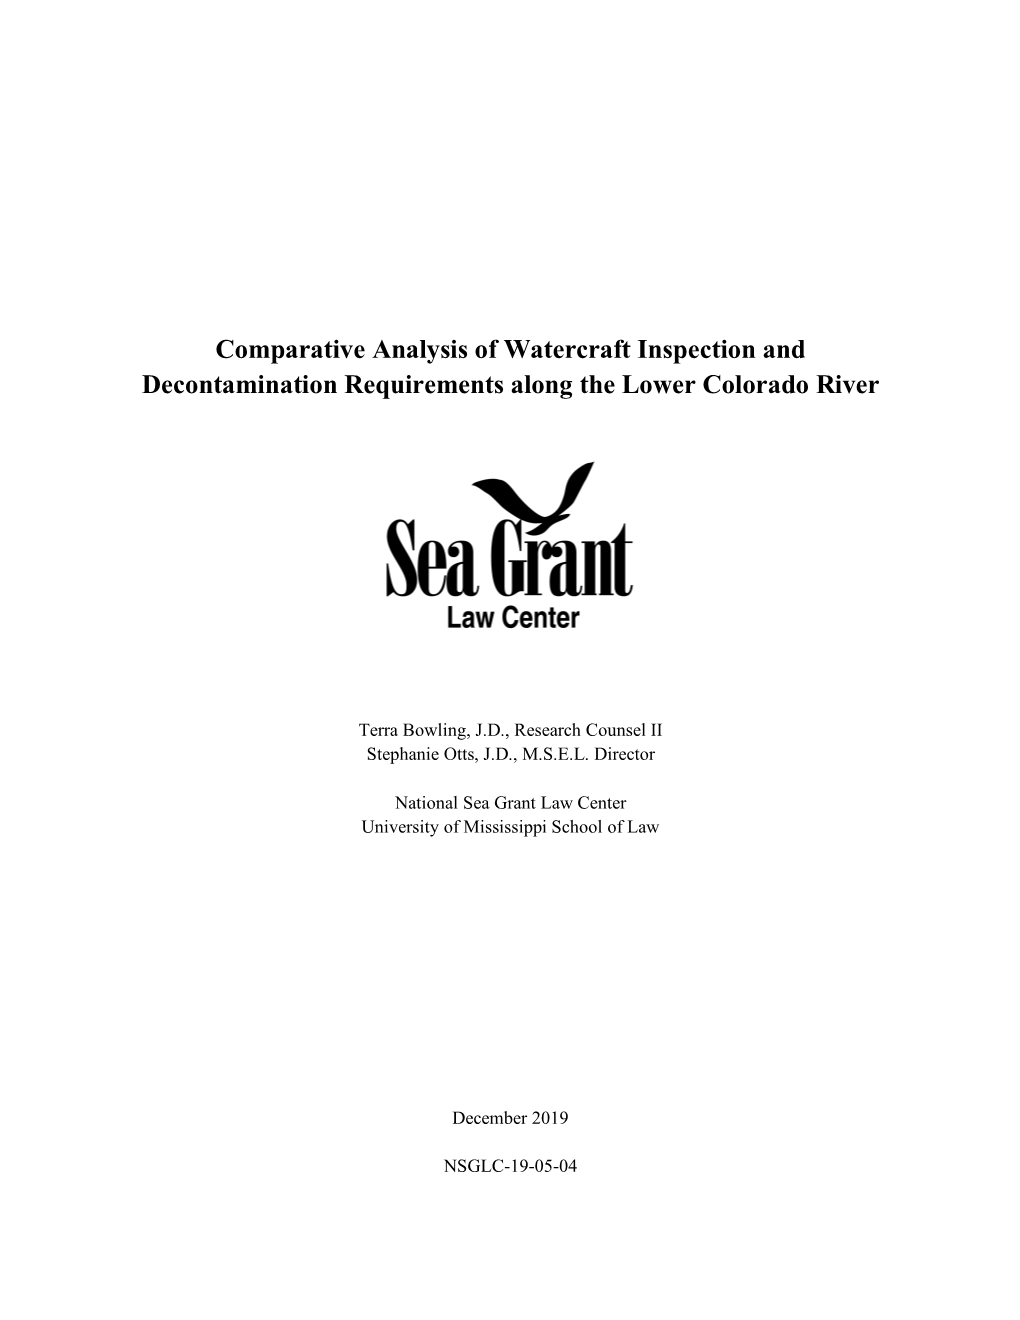 Comparative Analysis of Watercraft Inspection and Decontamination Requirements Along the Lower Colorado River